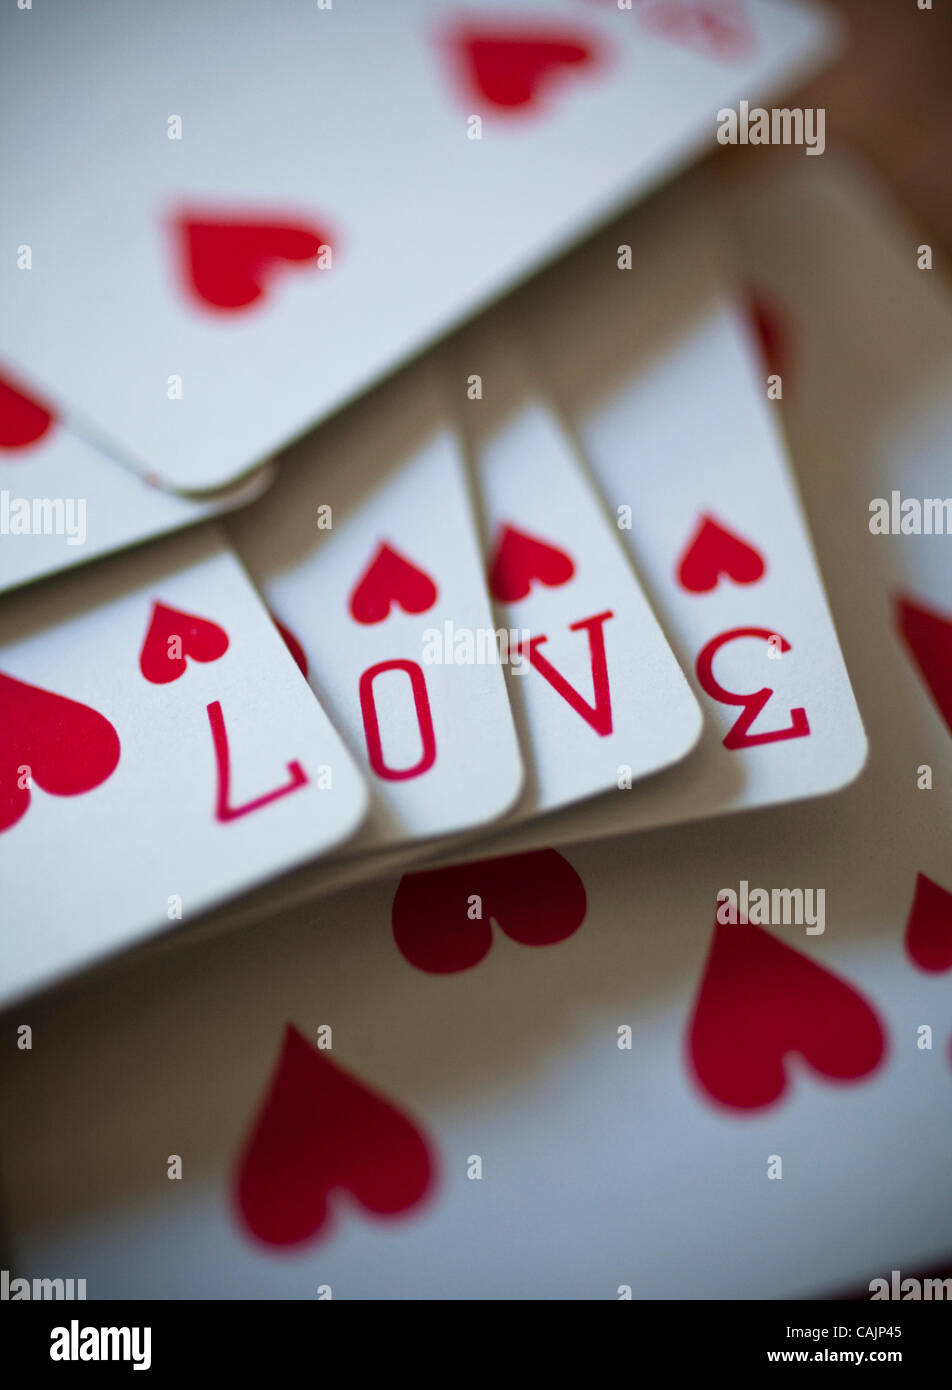 Jan. 12, 2011 - Fort Worth, Texas, U.S. - A suite of hearts from a playing card deck spells out the word LOVE. (Credit Image: © ZUMA Ralph Lauer/ZUMAPRESS.com) Stock Photo